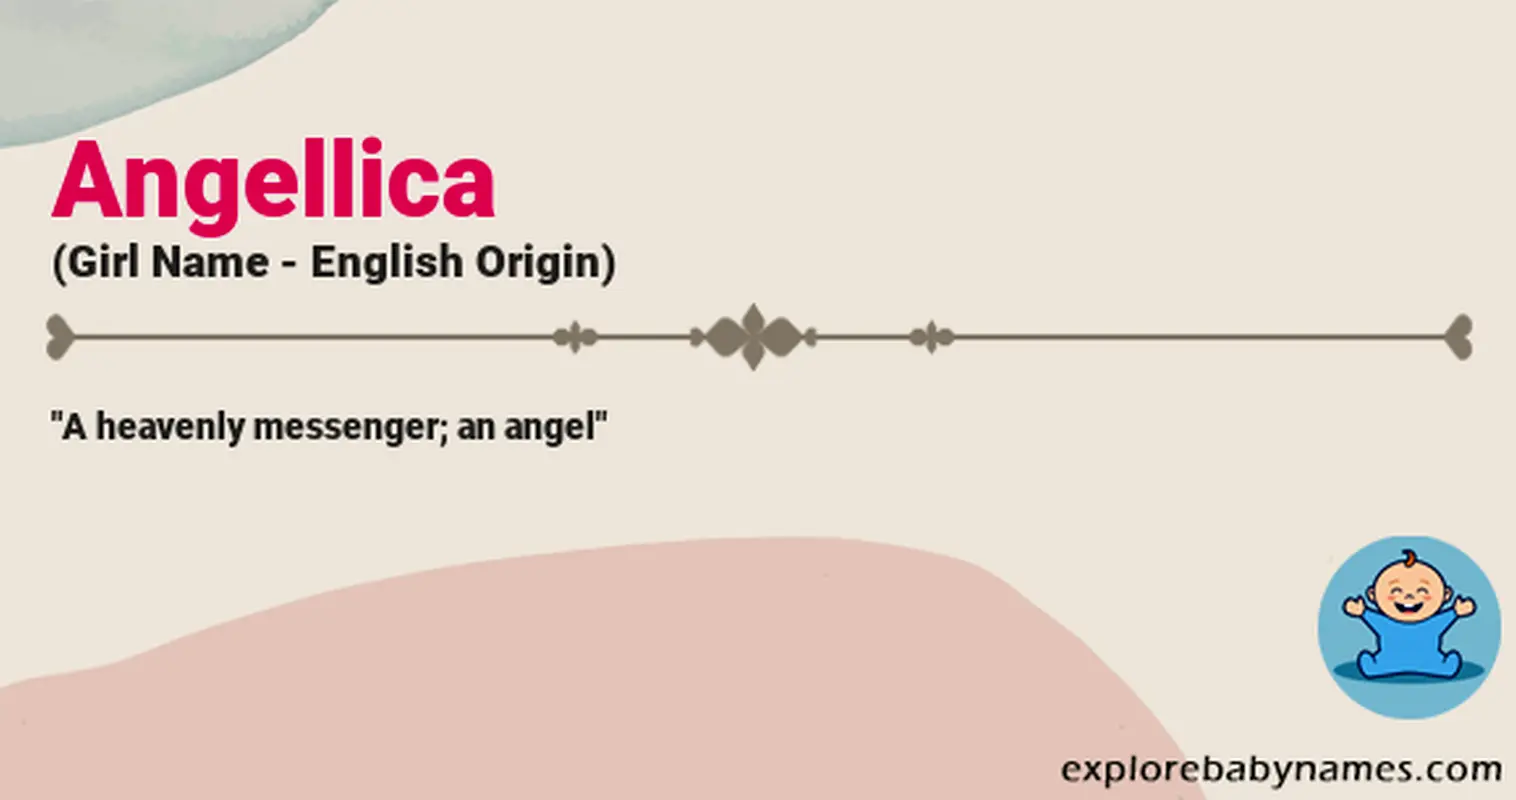 Meaning of Angellica